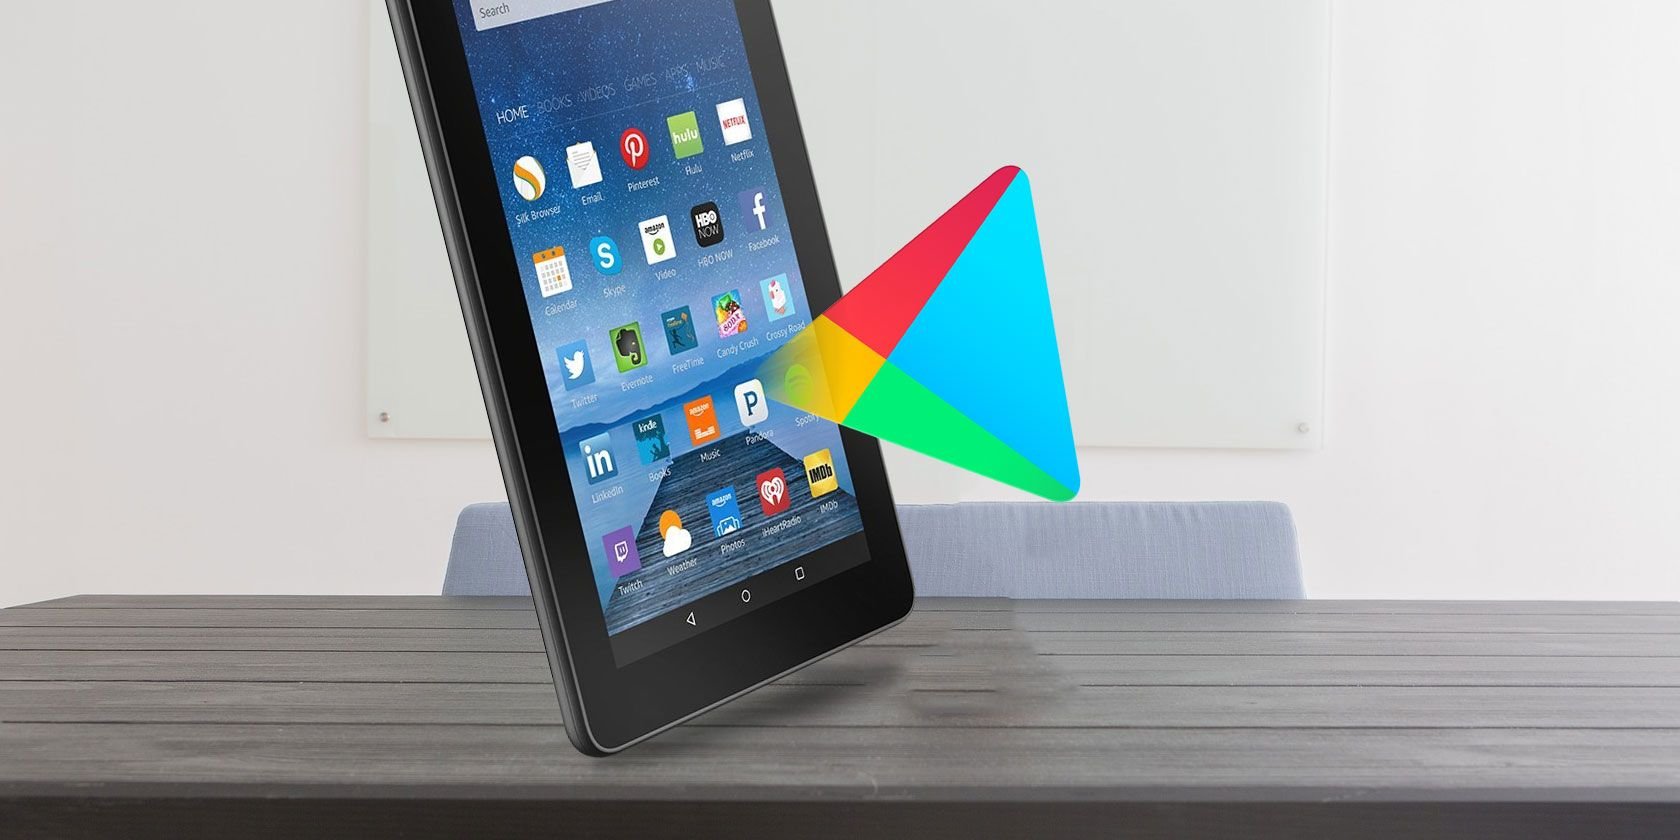 How to Install Google Play Store on Fire OS (Amazon Fire Tablets)